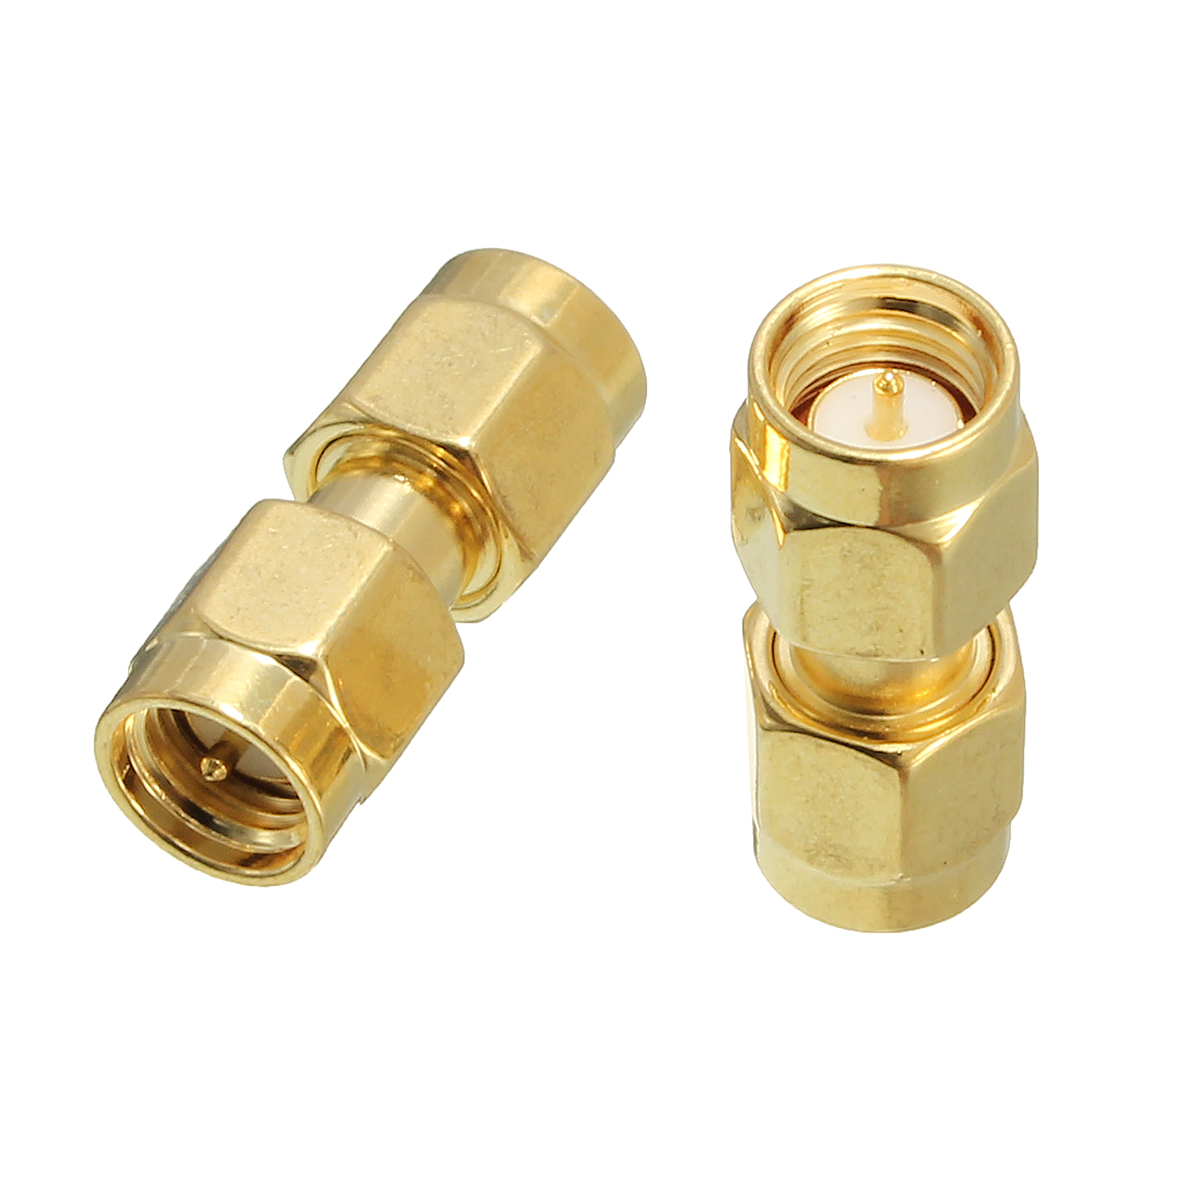 Excellwayreg-CA01-2Pcs-Copper-SMA-Male-To-SMA-Male-Plug-RF-Coaxial-Adapter-Connector-1073343-3